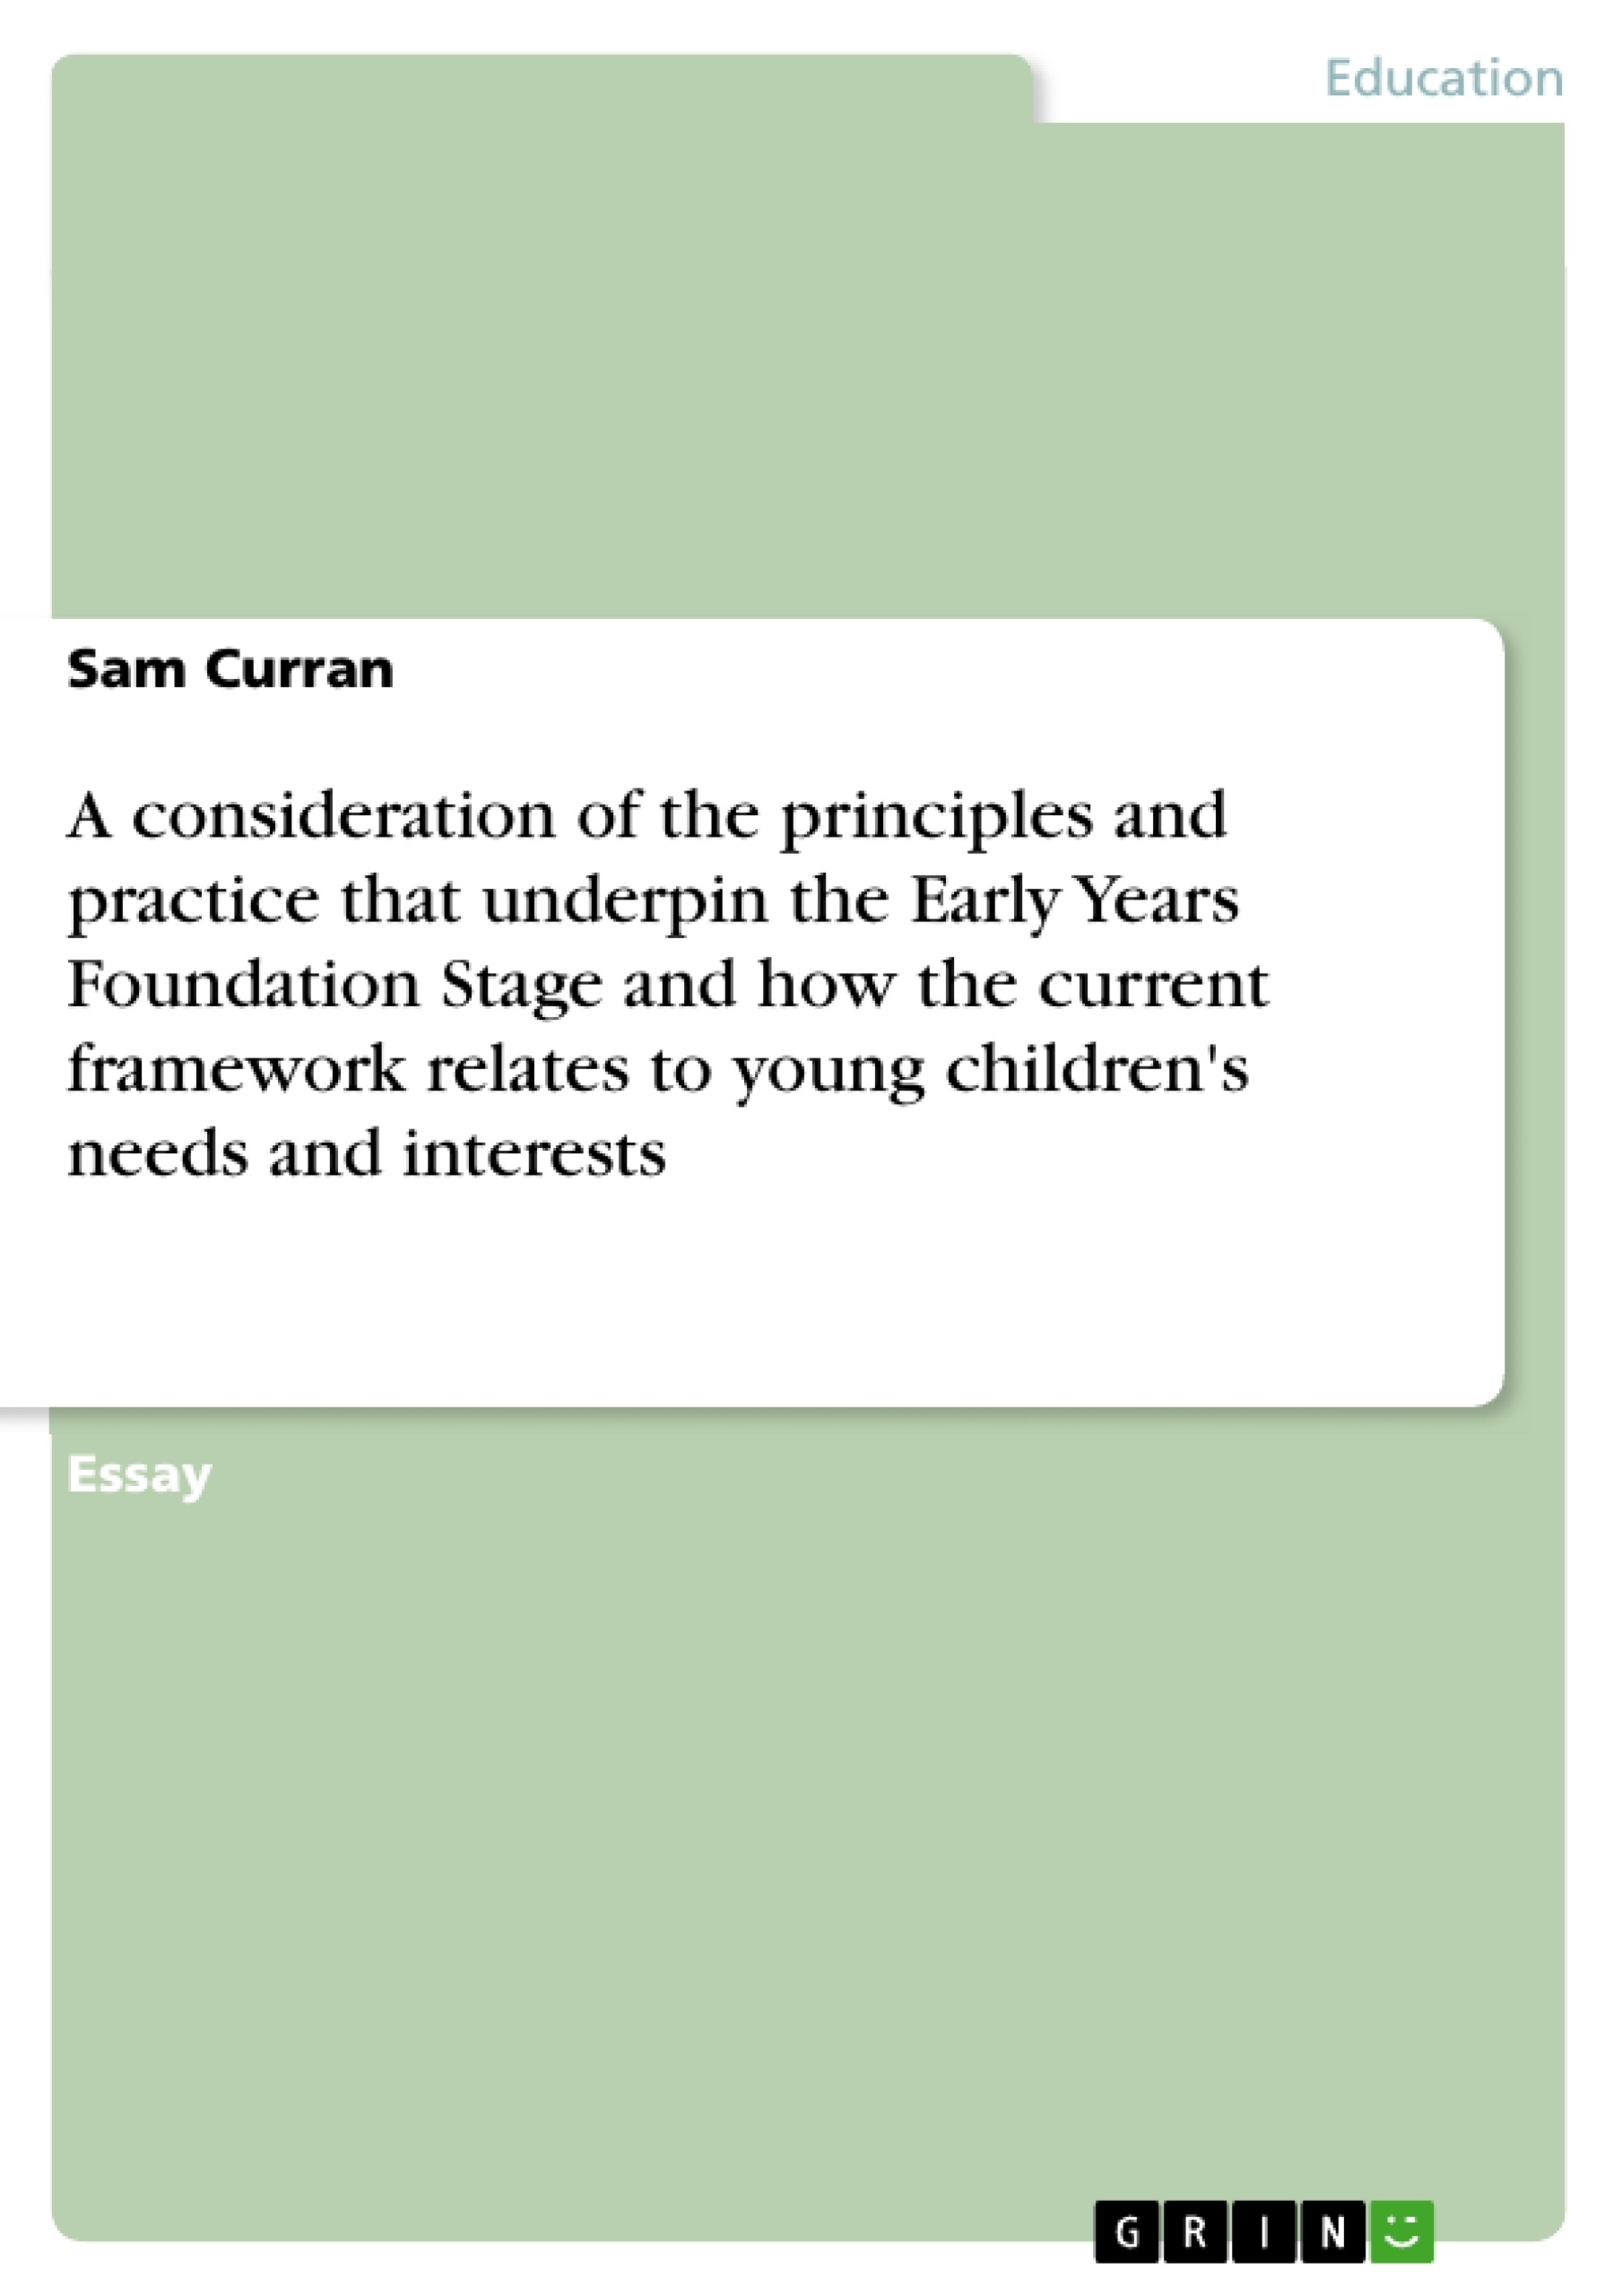 Title: A consideration of the principles and practice that underpin the Early Years Foundation Stage and how the current framework relates to young children's needs and interests